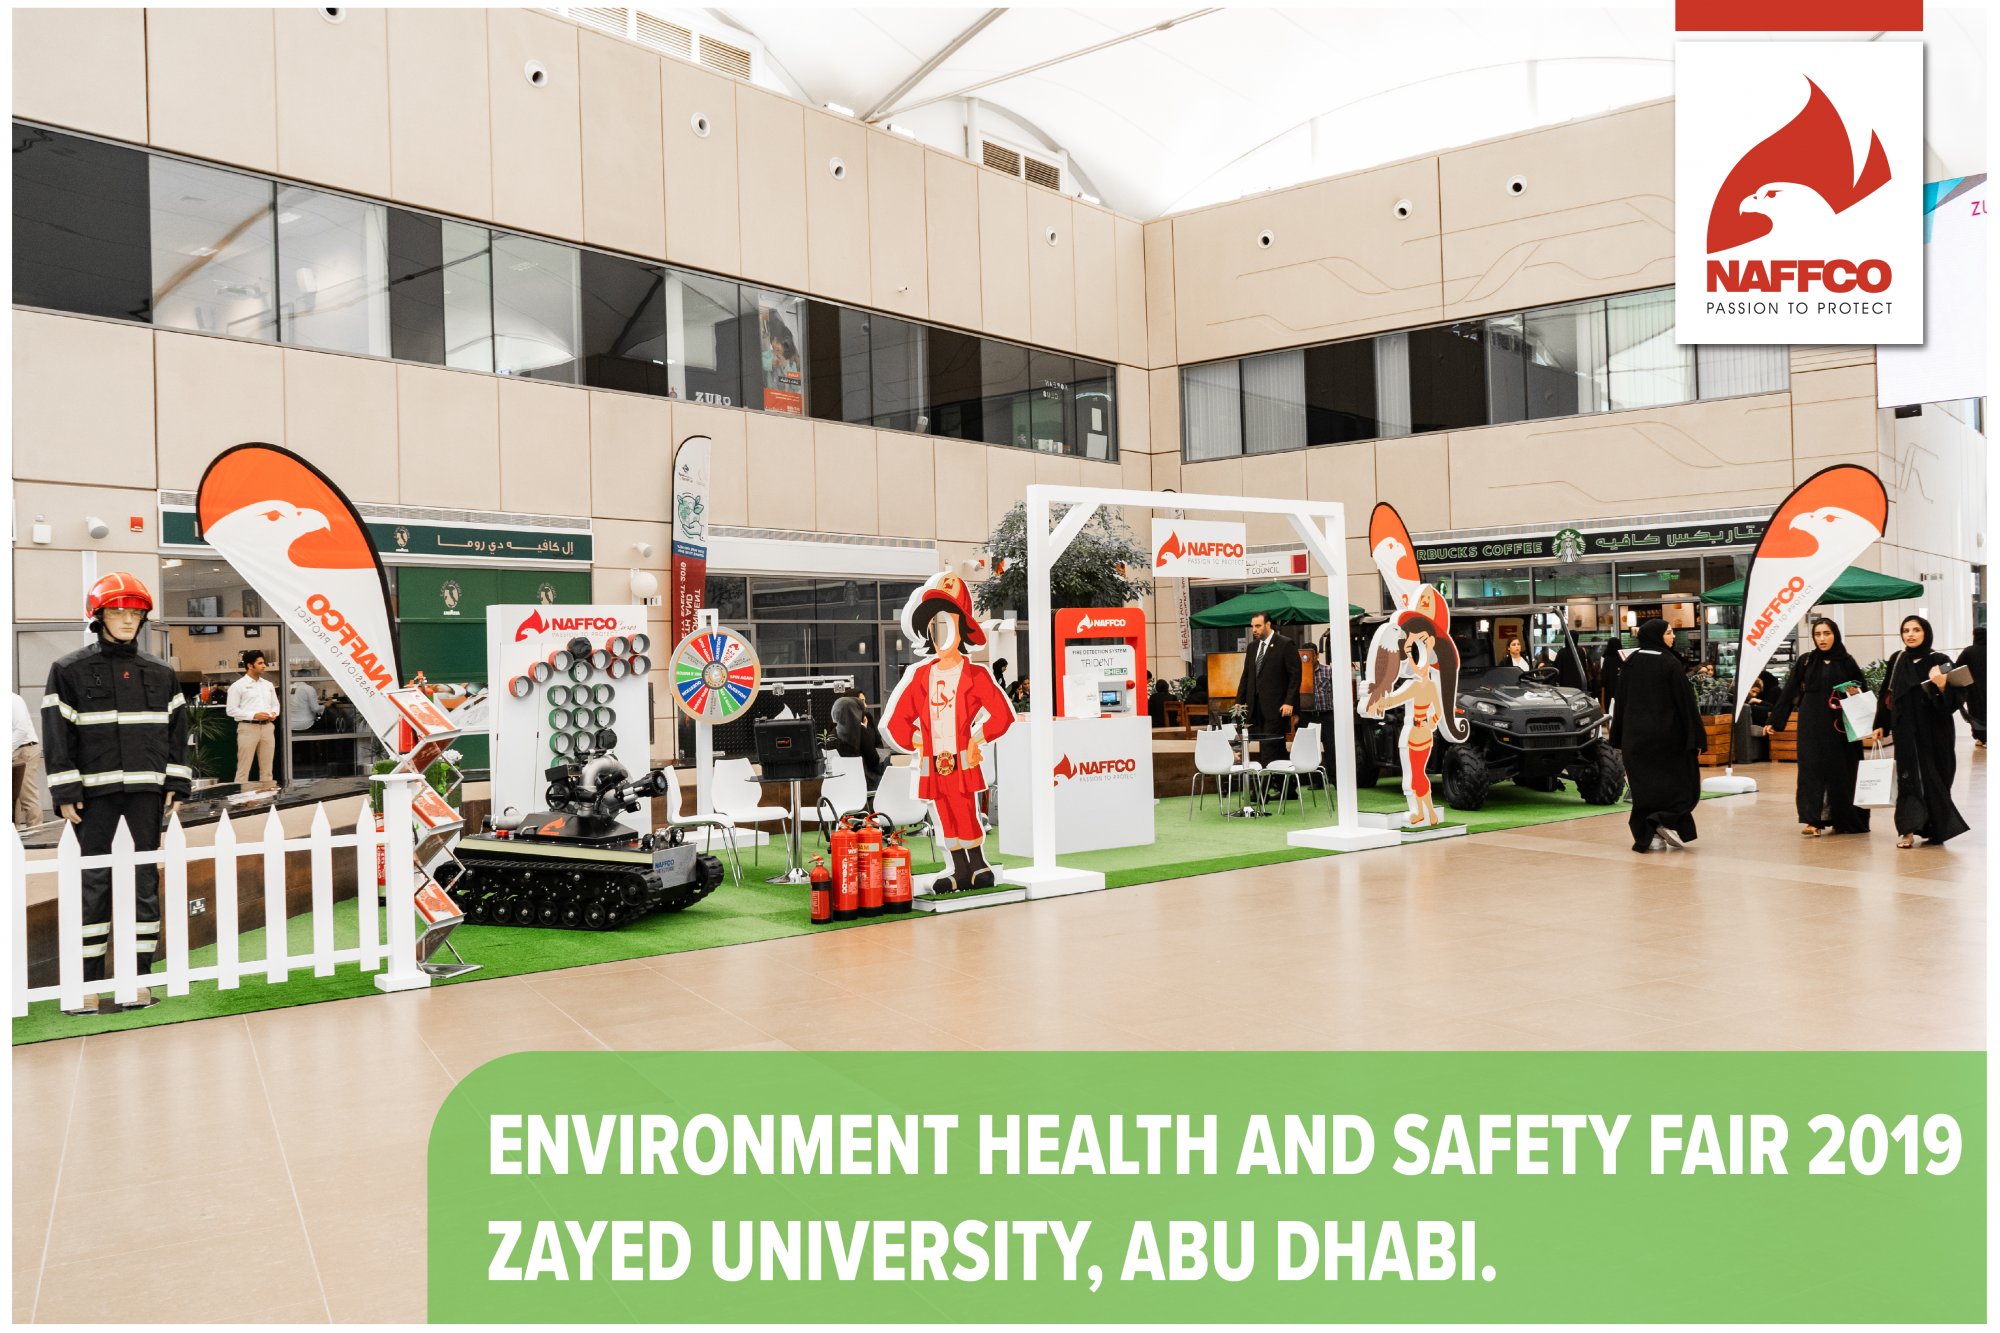 NAFFCO had successfully participated in Environment Health and Safety Event 2019 at Zayed University, Abu Dhabi